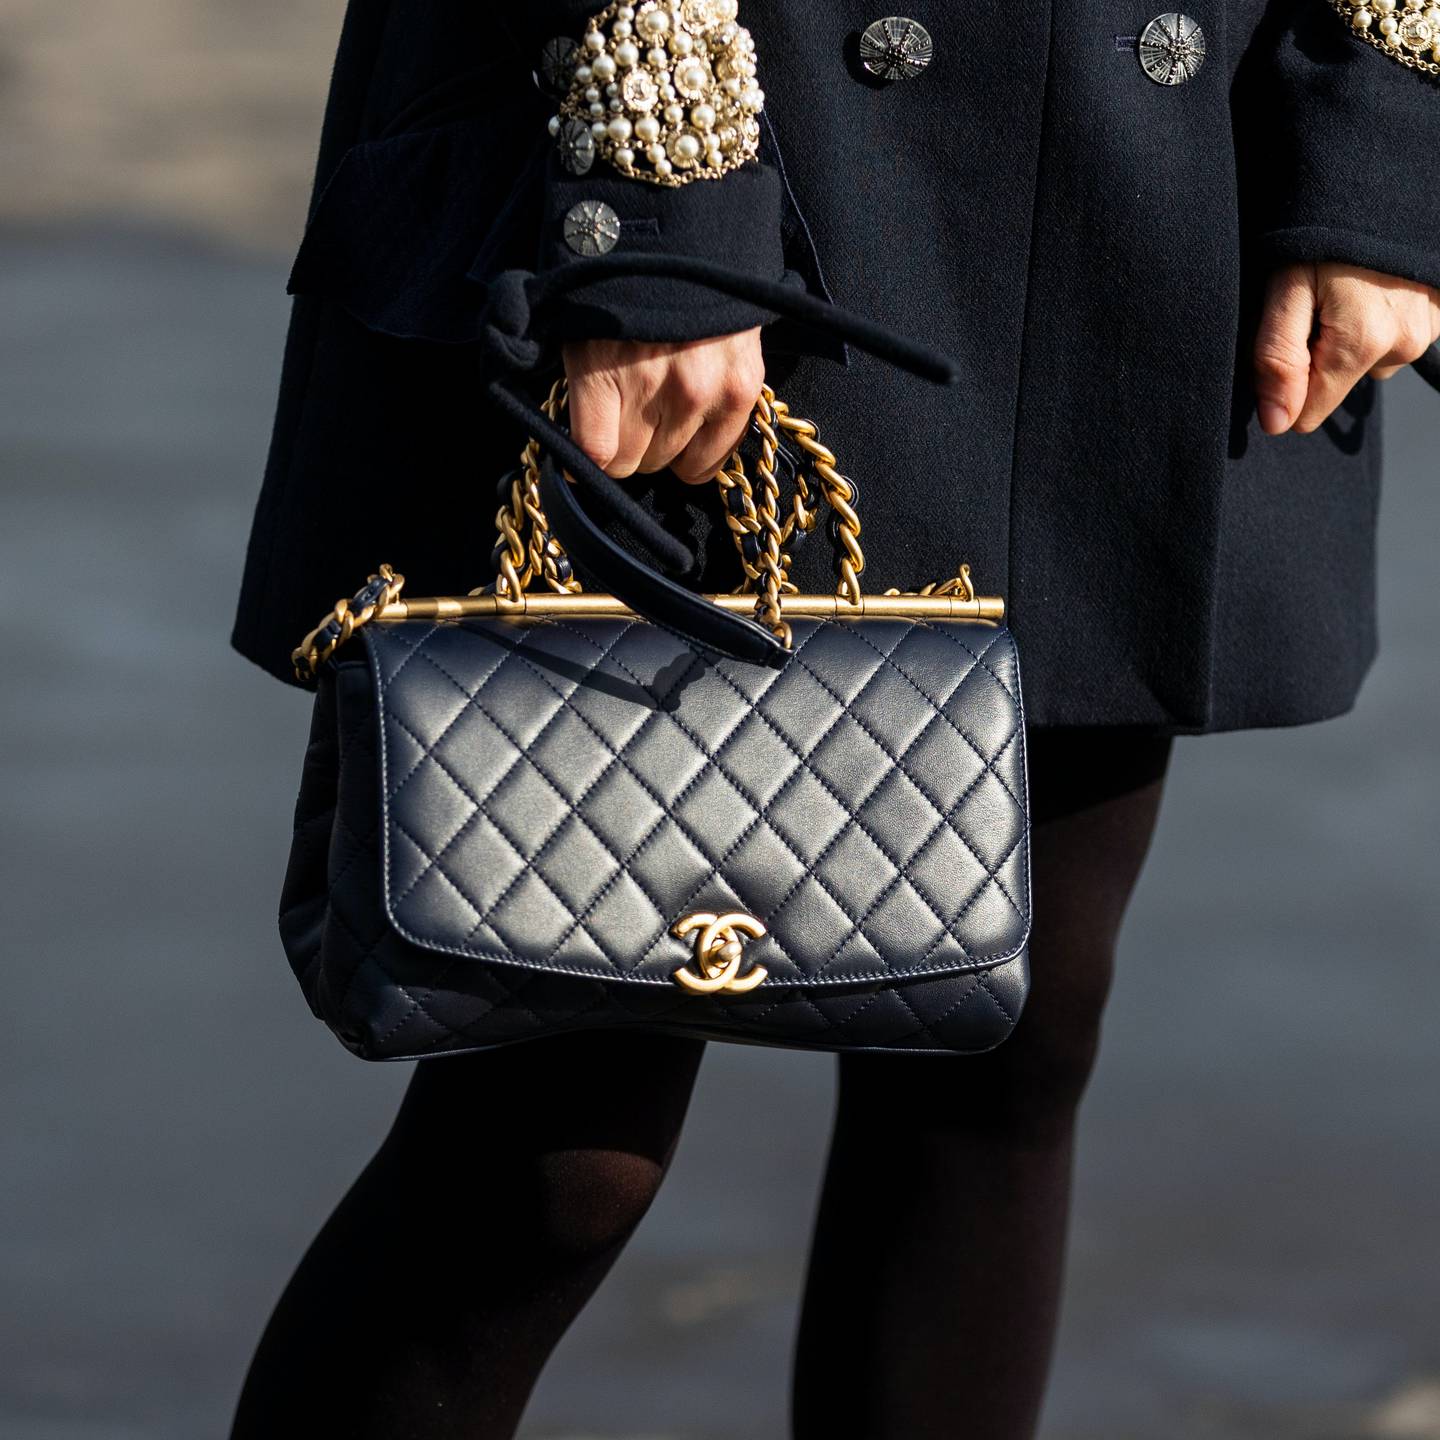 Chanel Hikes Handbag Prices in Run-up to Christmas